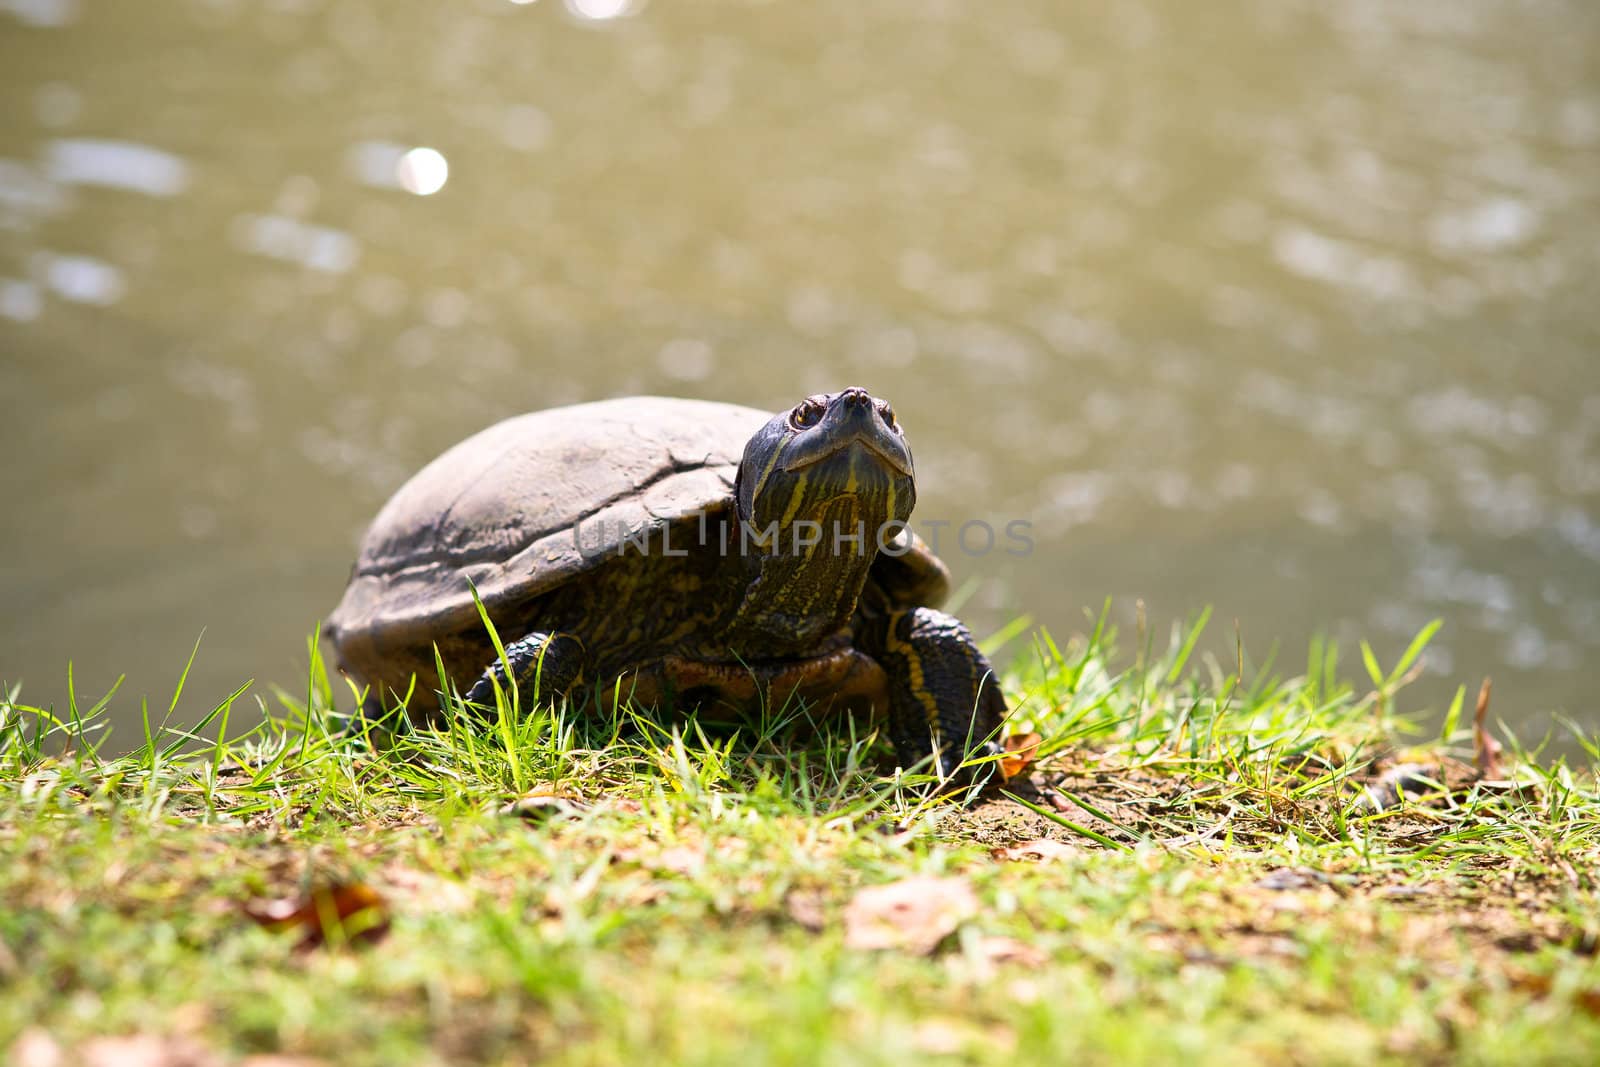 Wild tortoise on the green grass, close-up